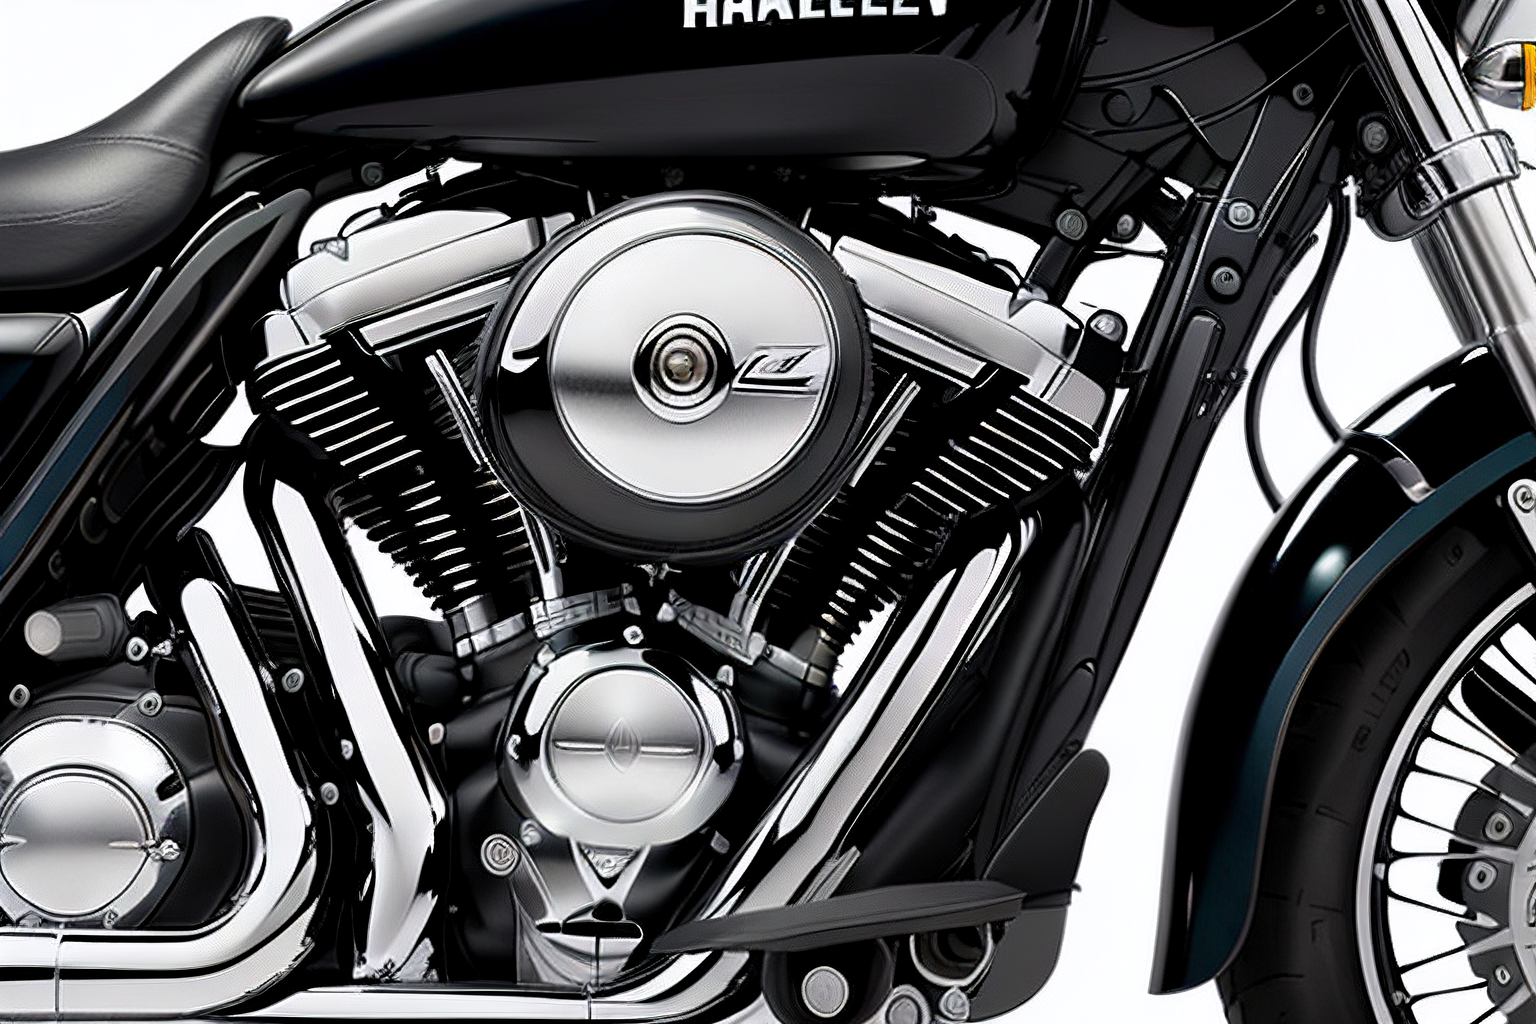 Harley Davidson Throttle By Wire Problems: Overview